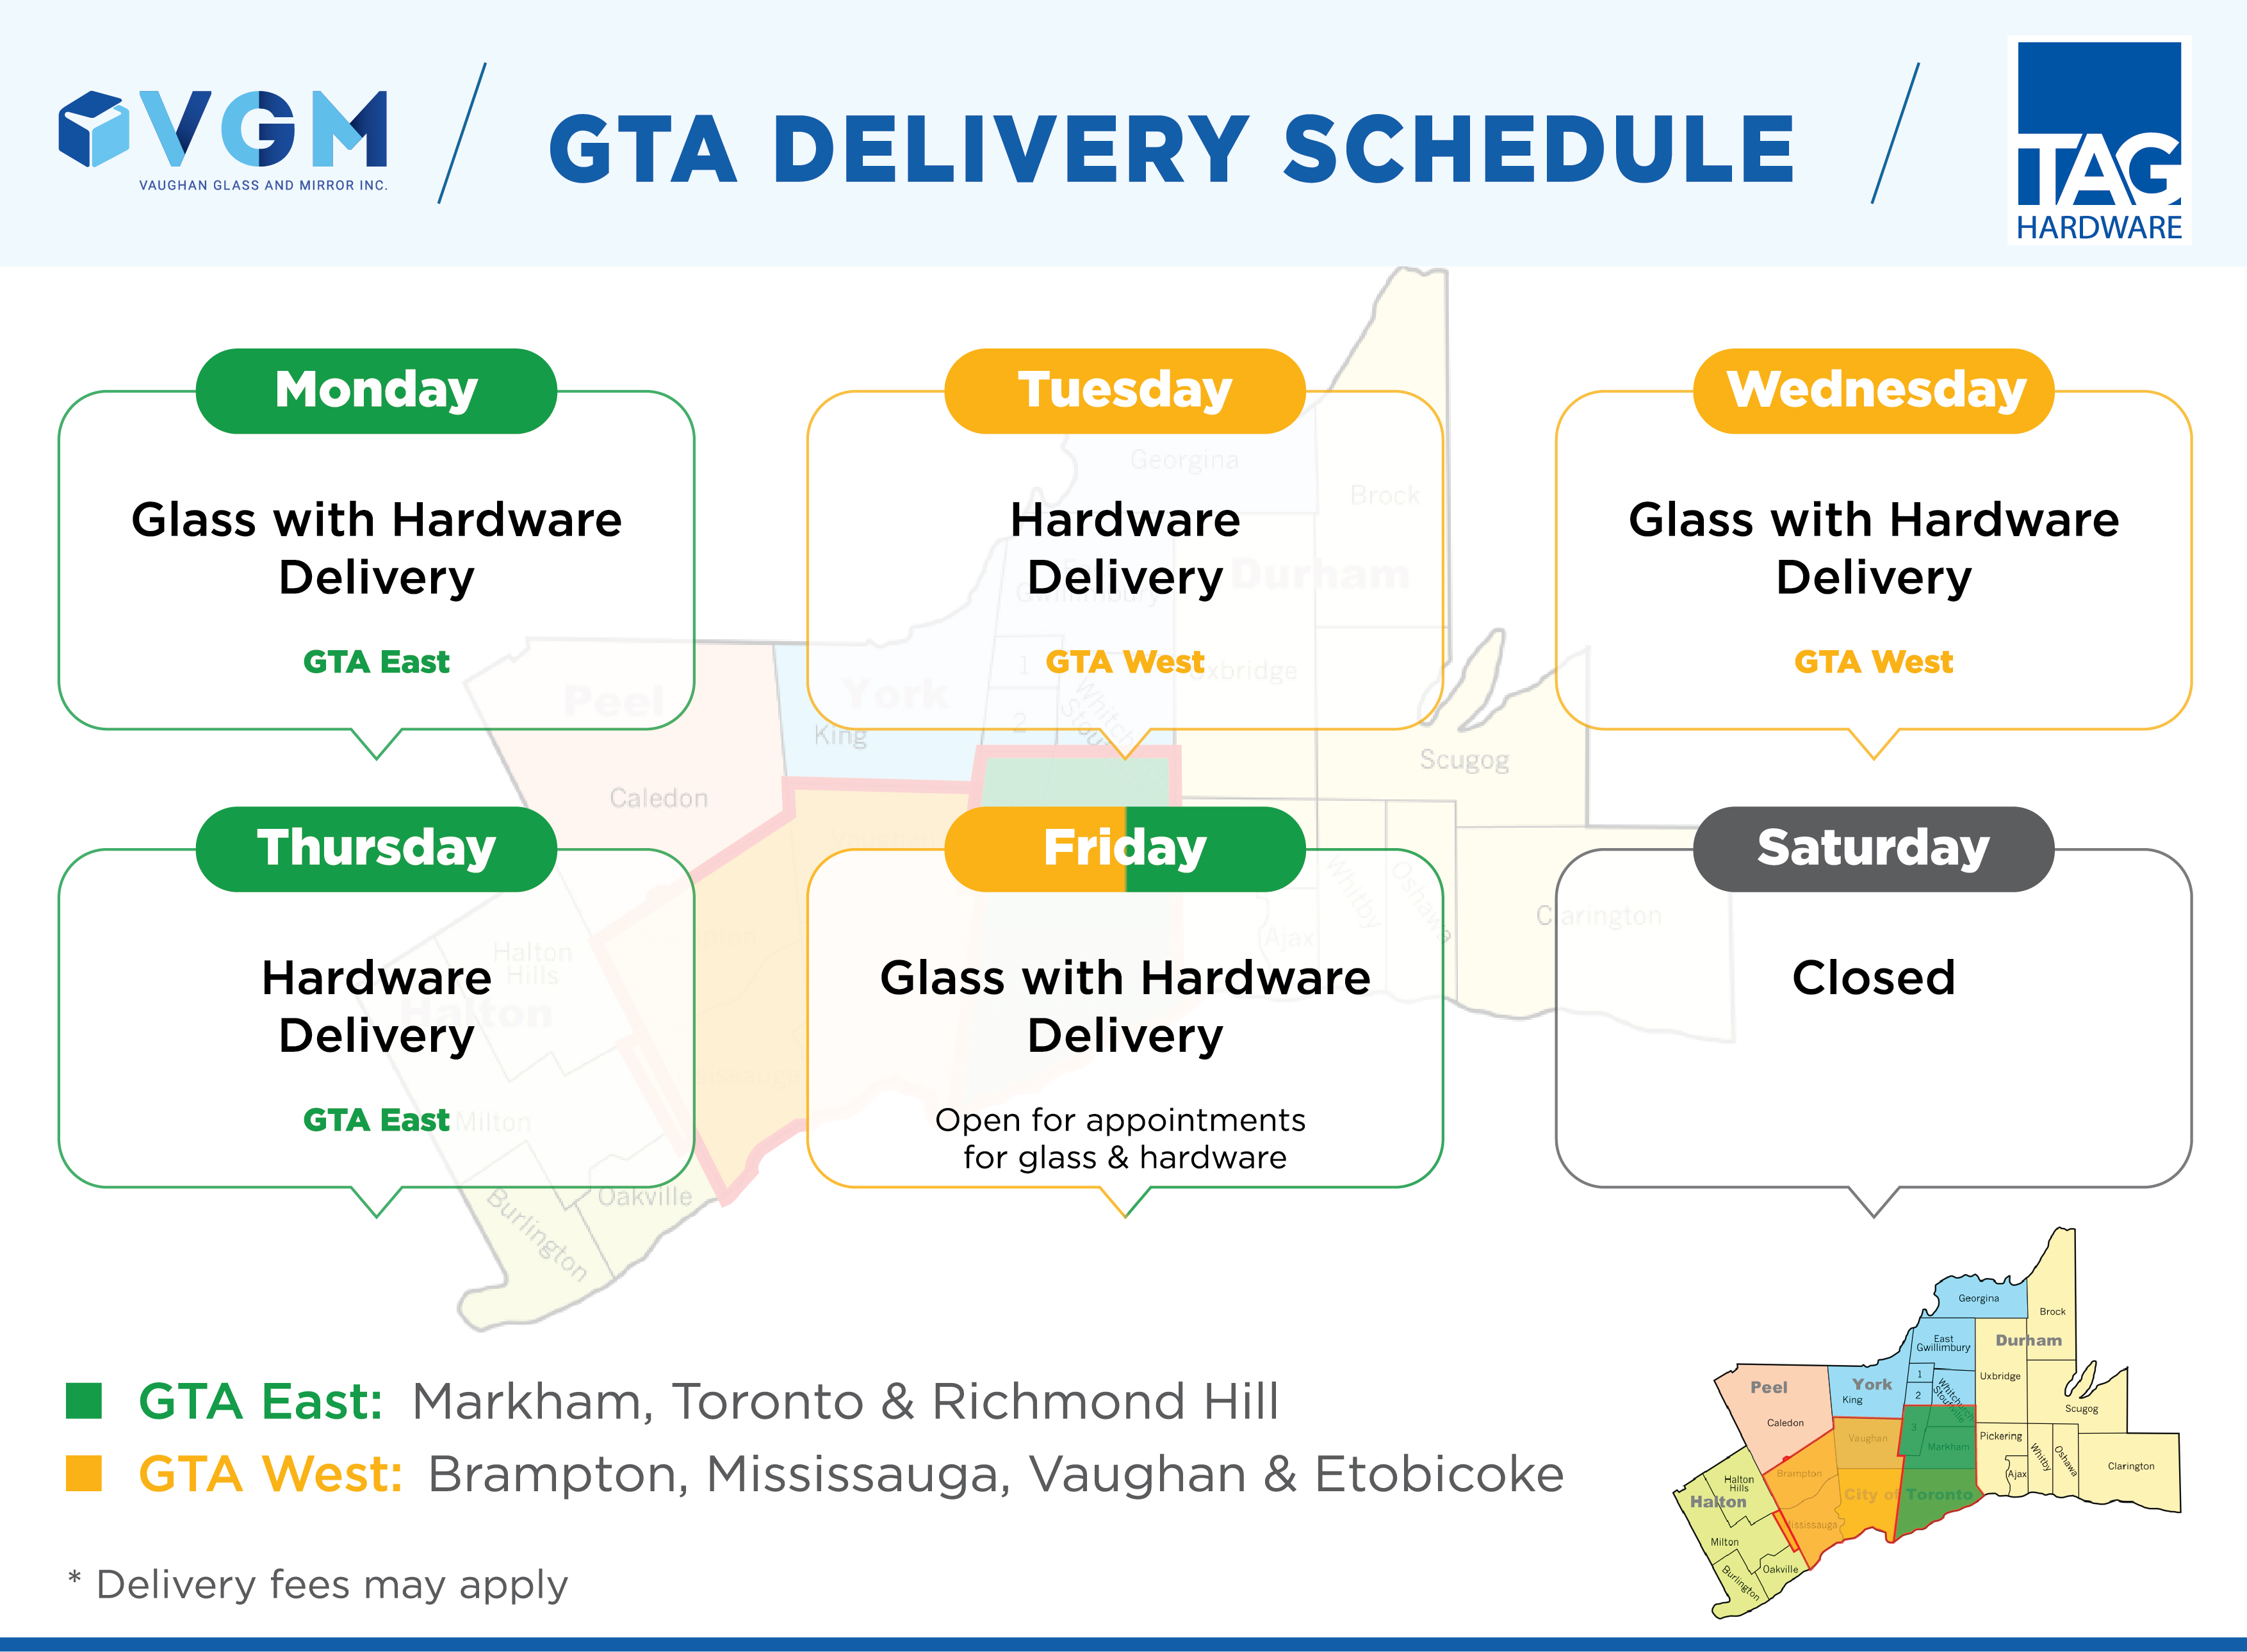 gta-delivery-schedule-tag-hardware.jpg